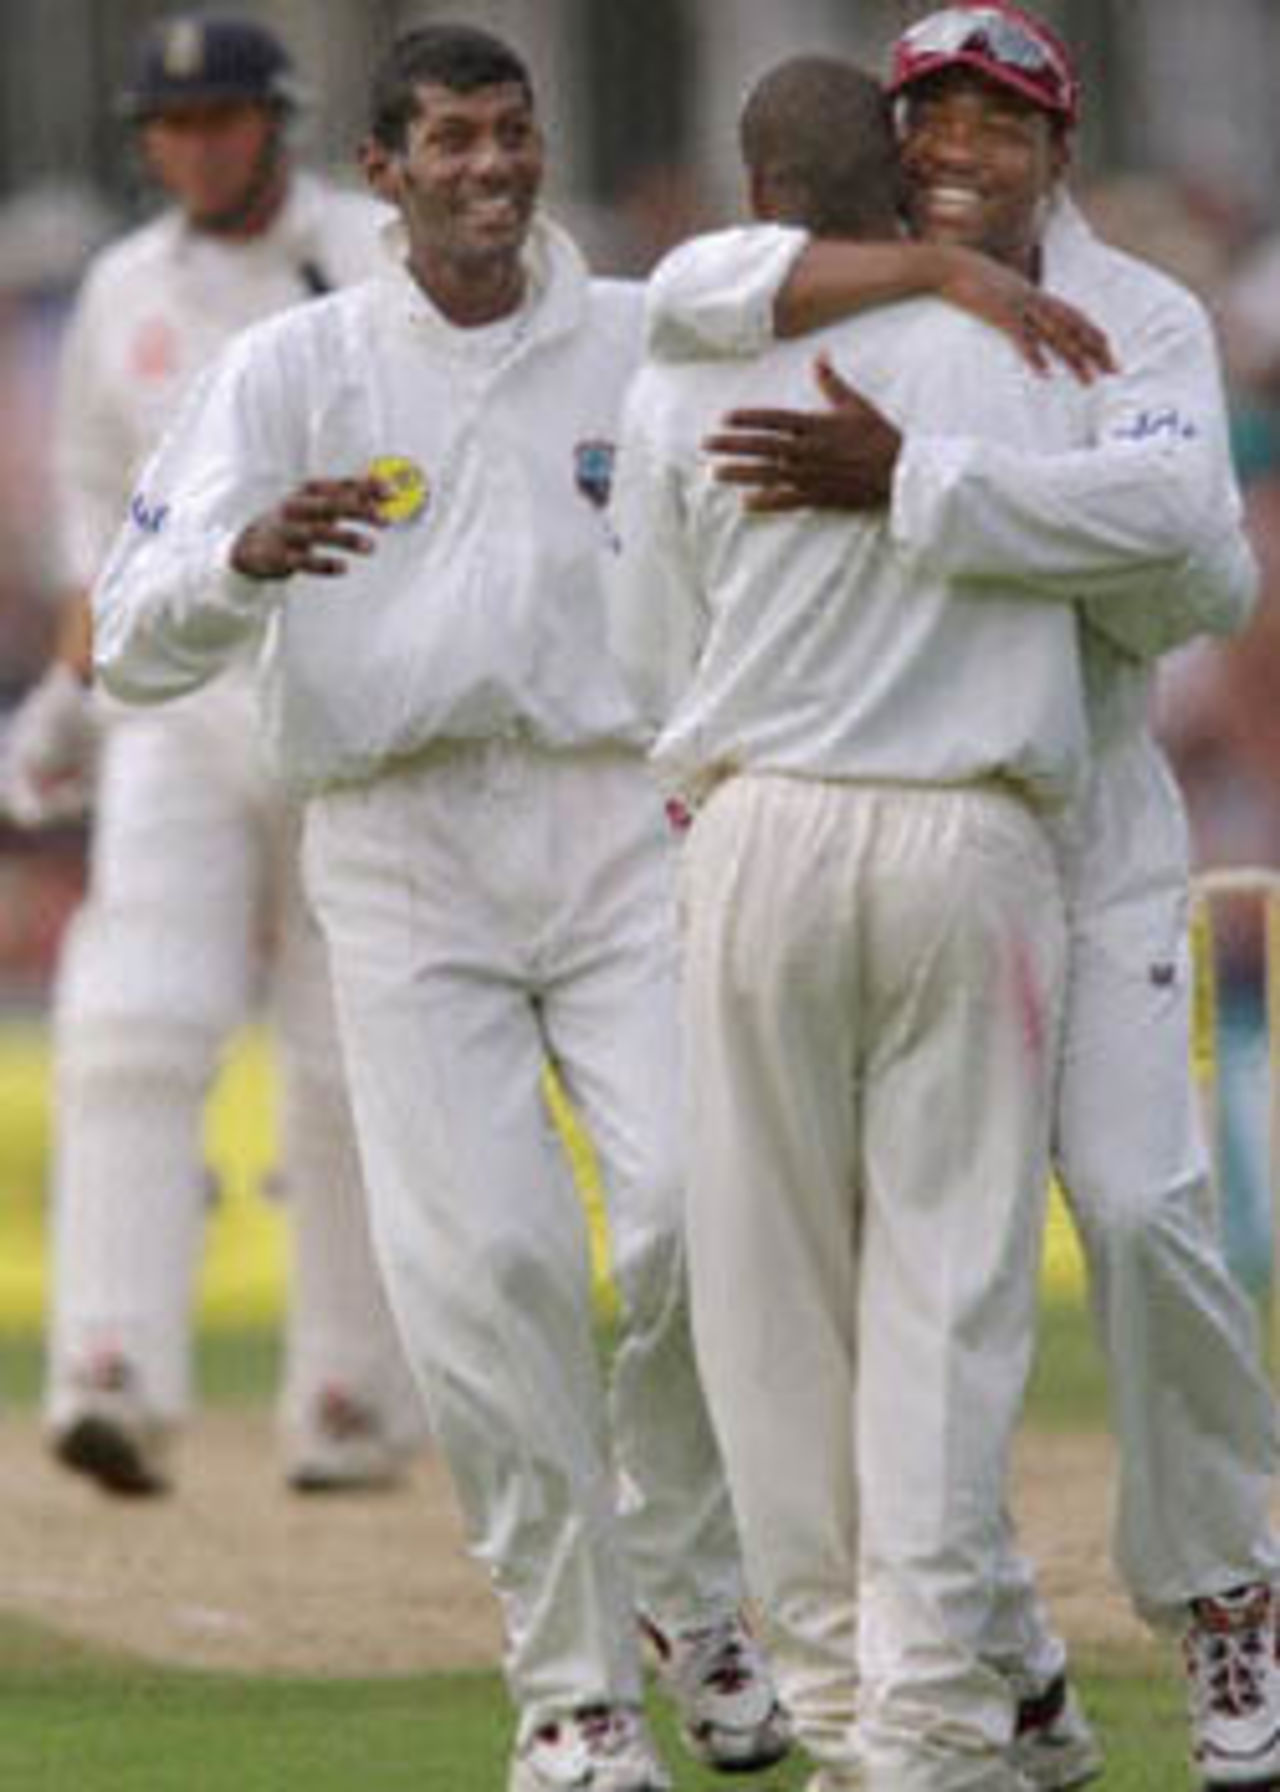 West Indies players Mahendra Nagamootoo (L), Sherwin Campbell (C) and Brian Lara (R) celebrate the fall of Marcus Trescothick's wicket during Fifth Test against England at the Oval in London. Nagamootoo, playing on his debut, claimed the first two wickets.